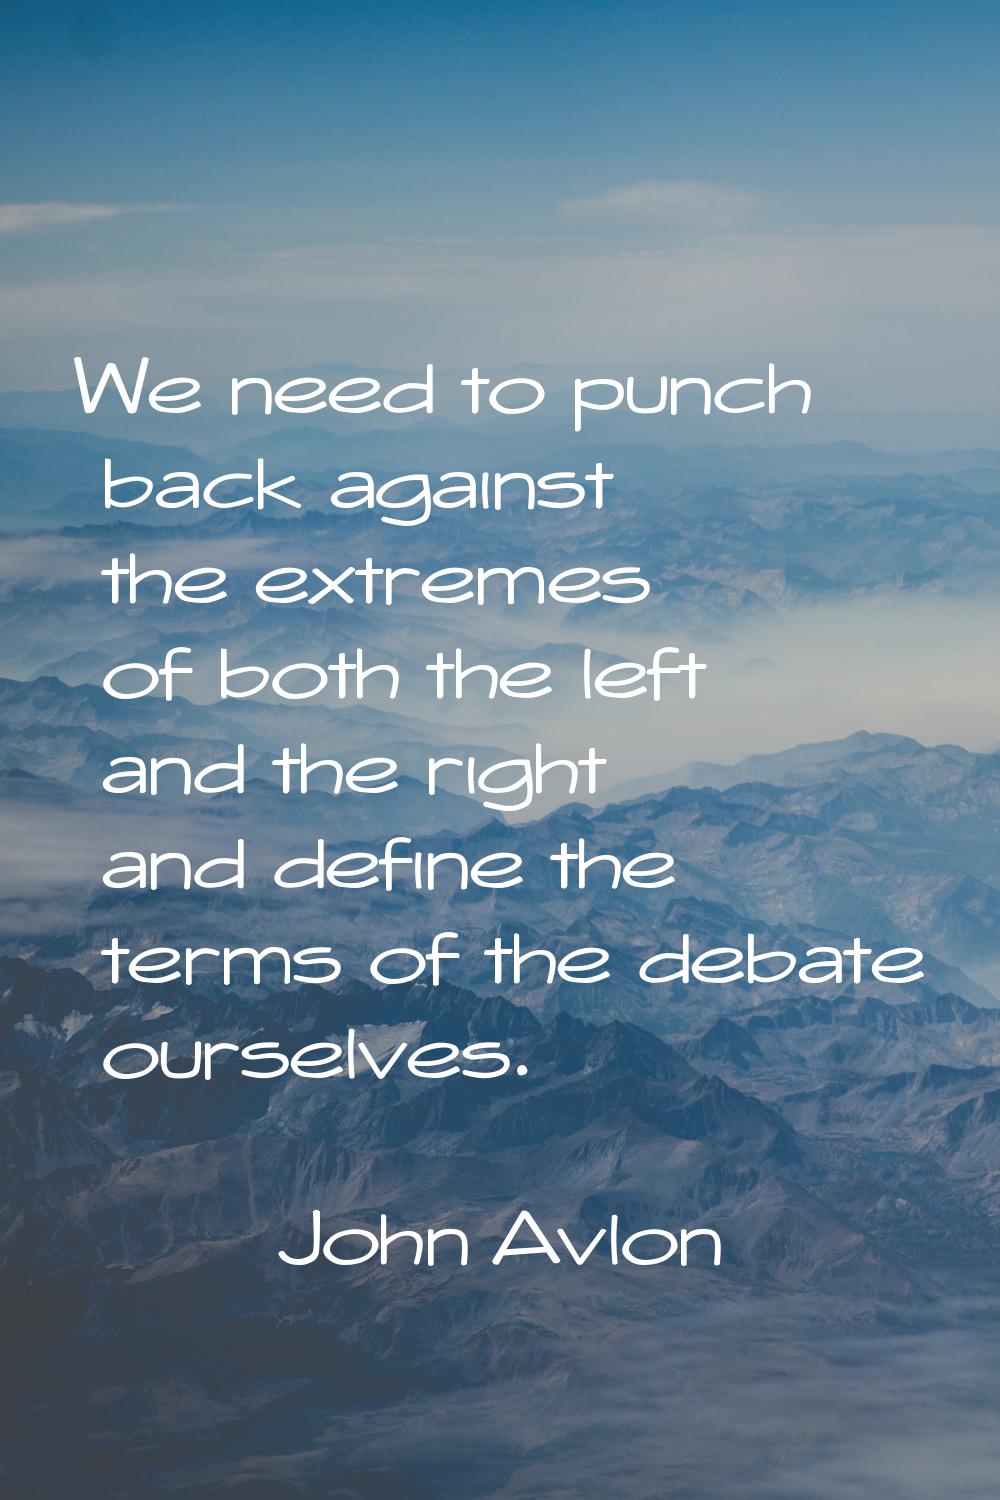 We need to punch back against the extremes of both the left and the right and define the terms of t